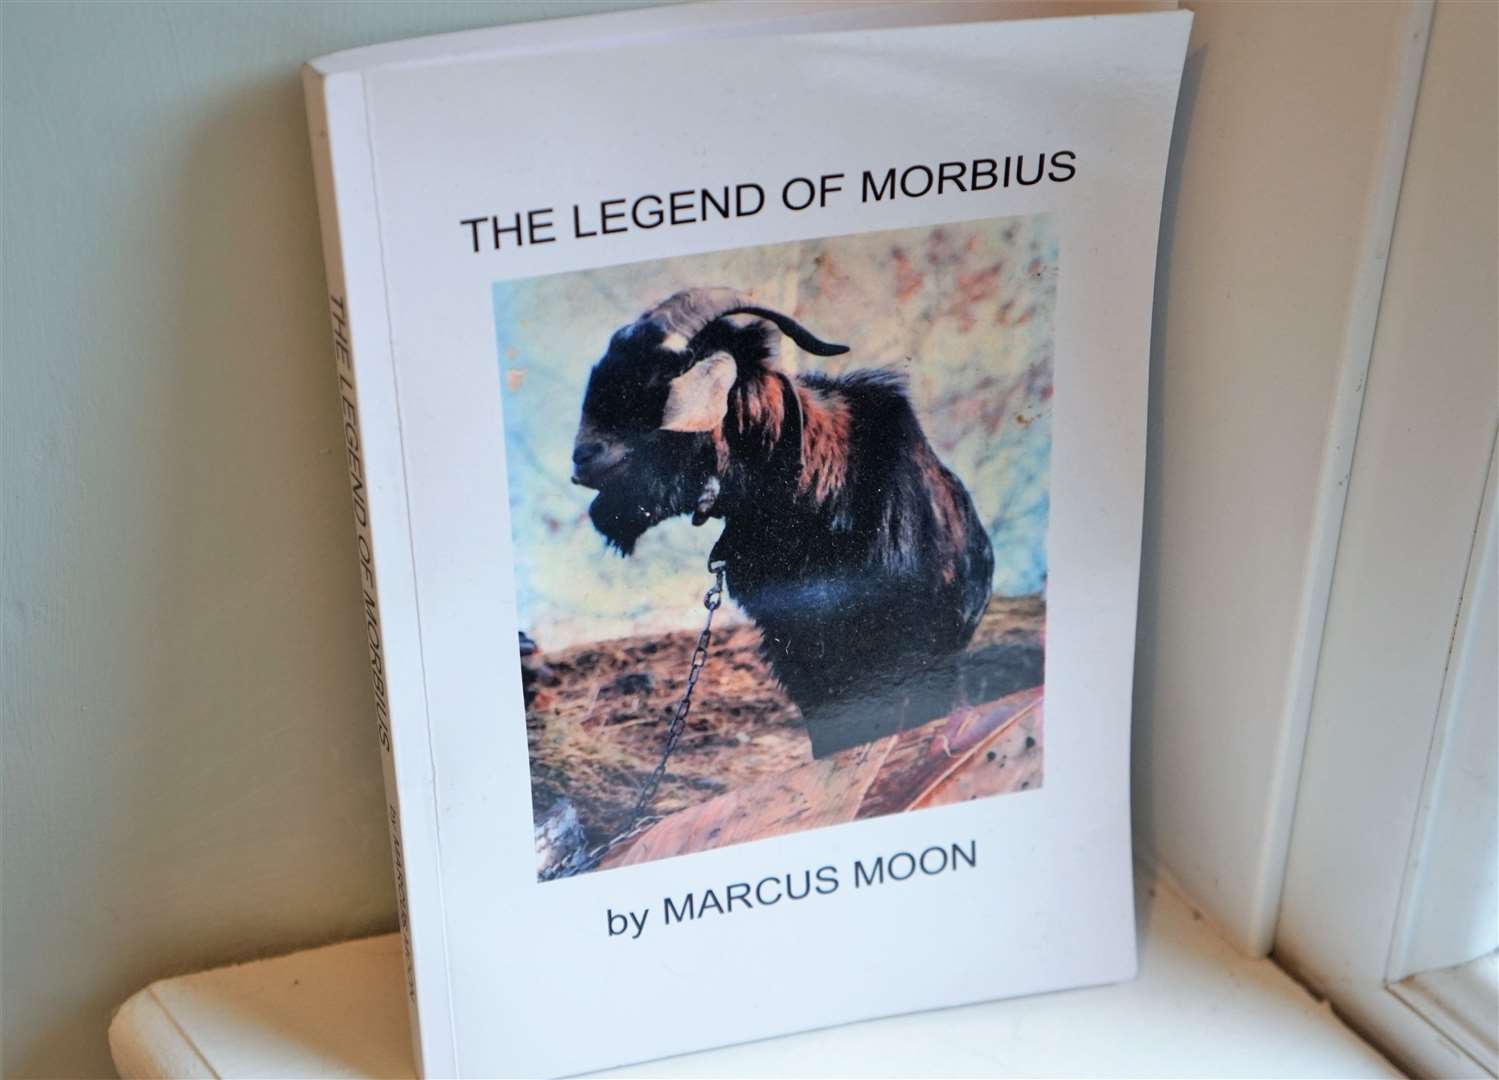 New book by Marcus Moon called The Legend of Morbius.